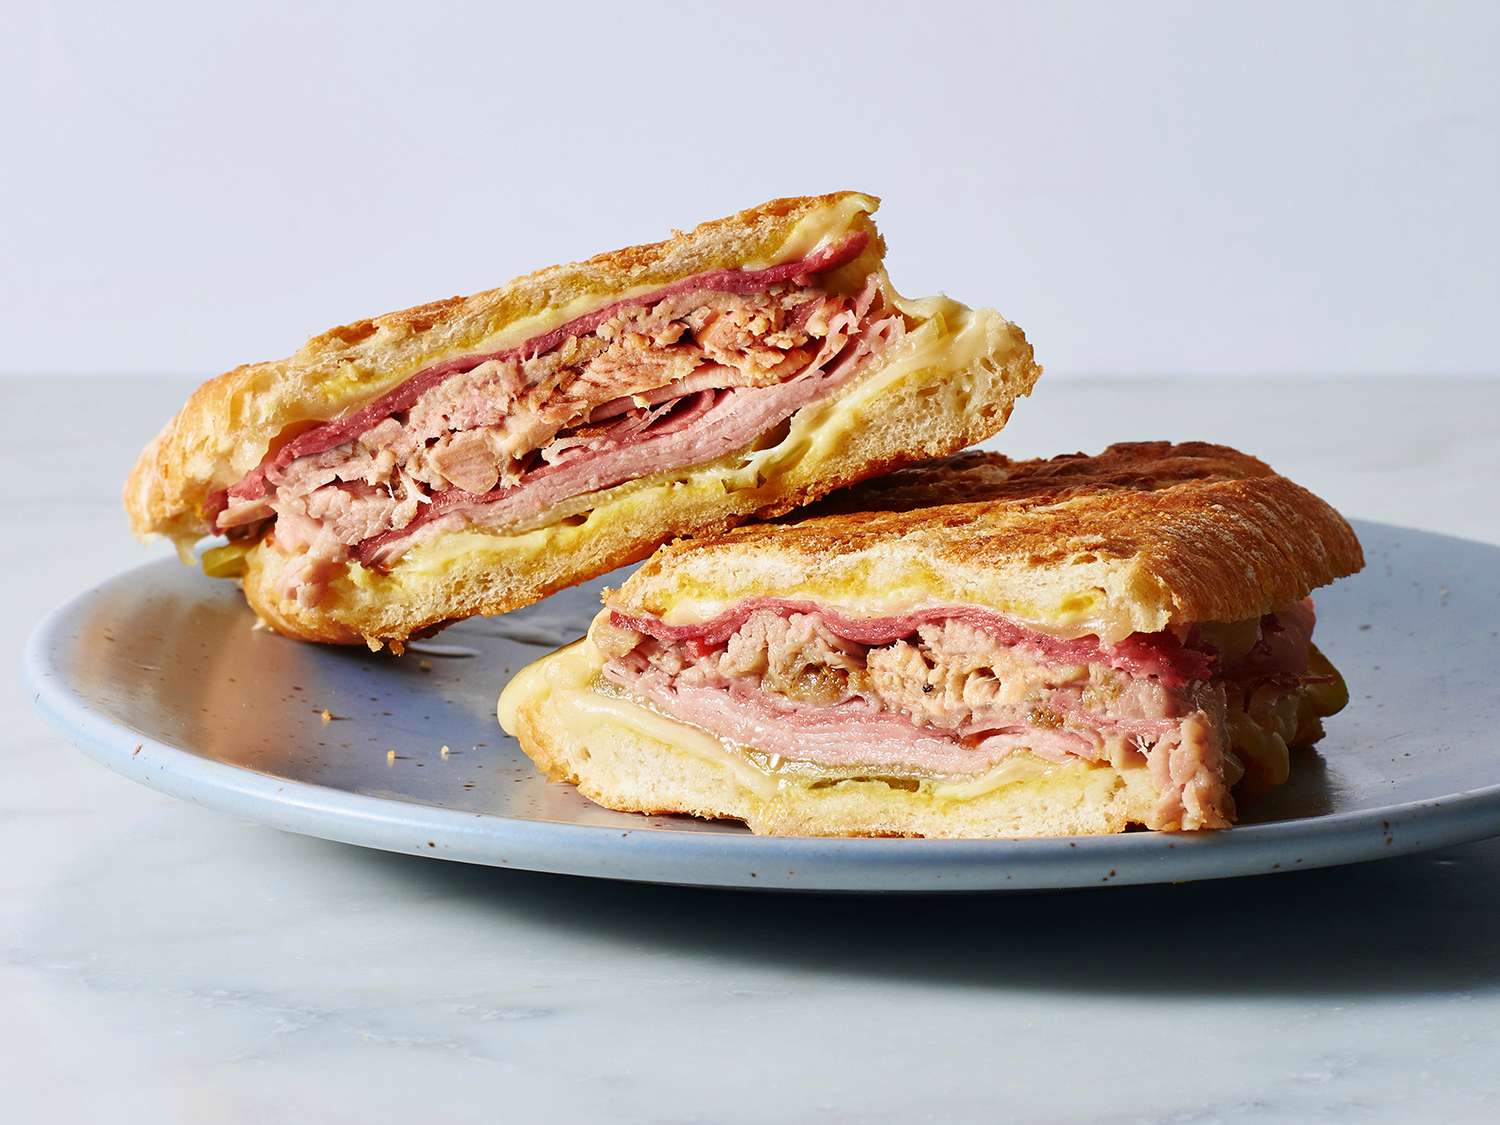 Two cut Cuban sandwiches resting on a plate.